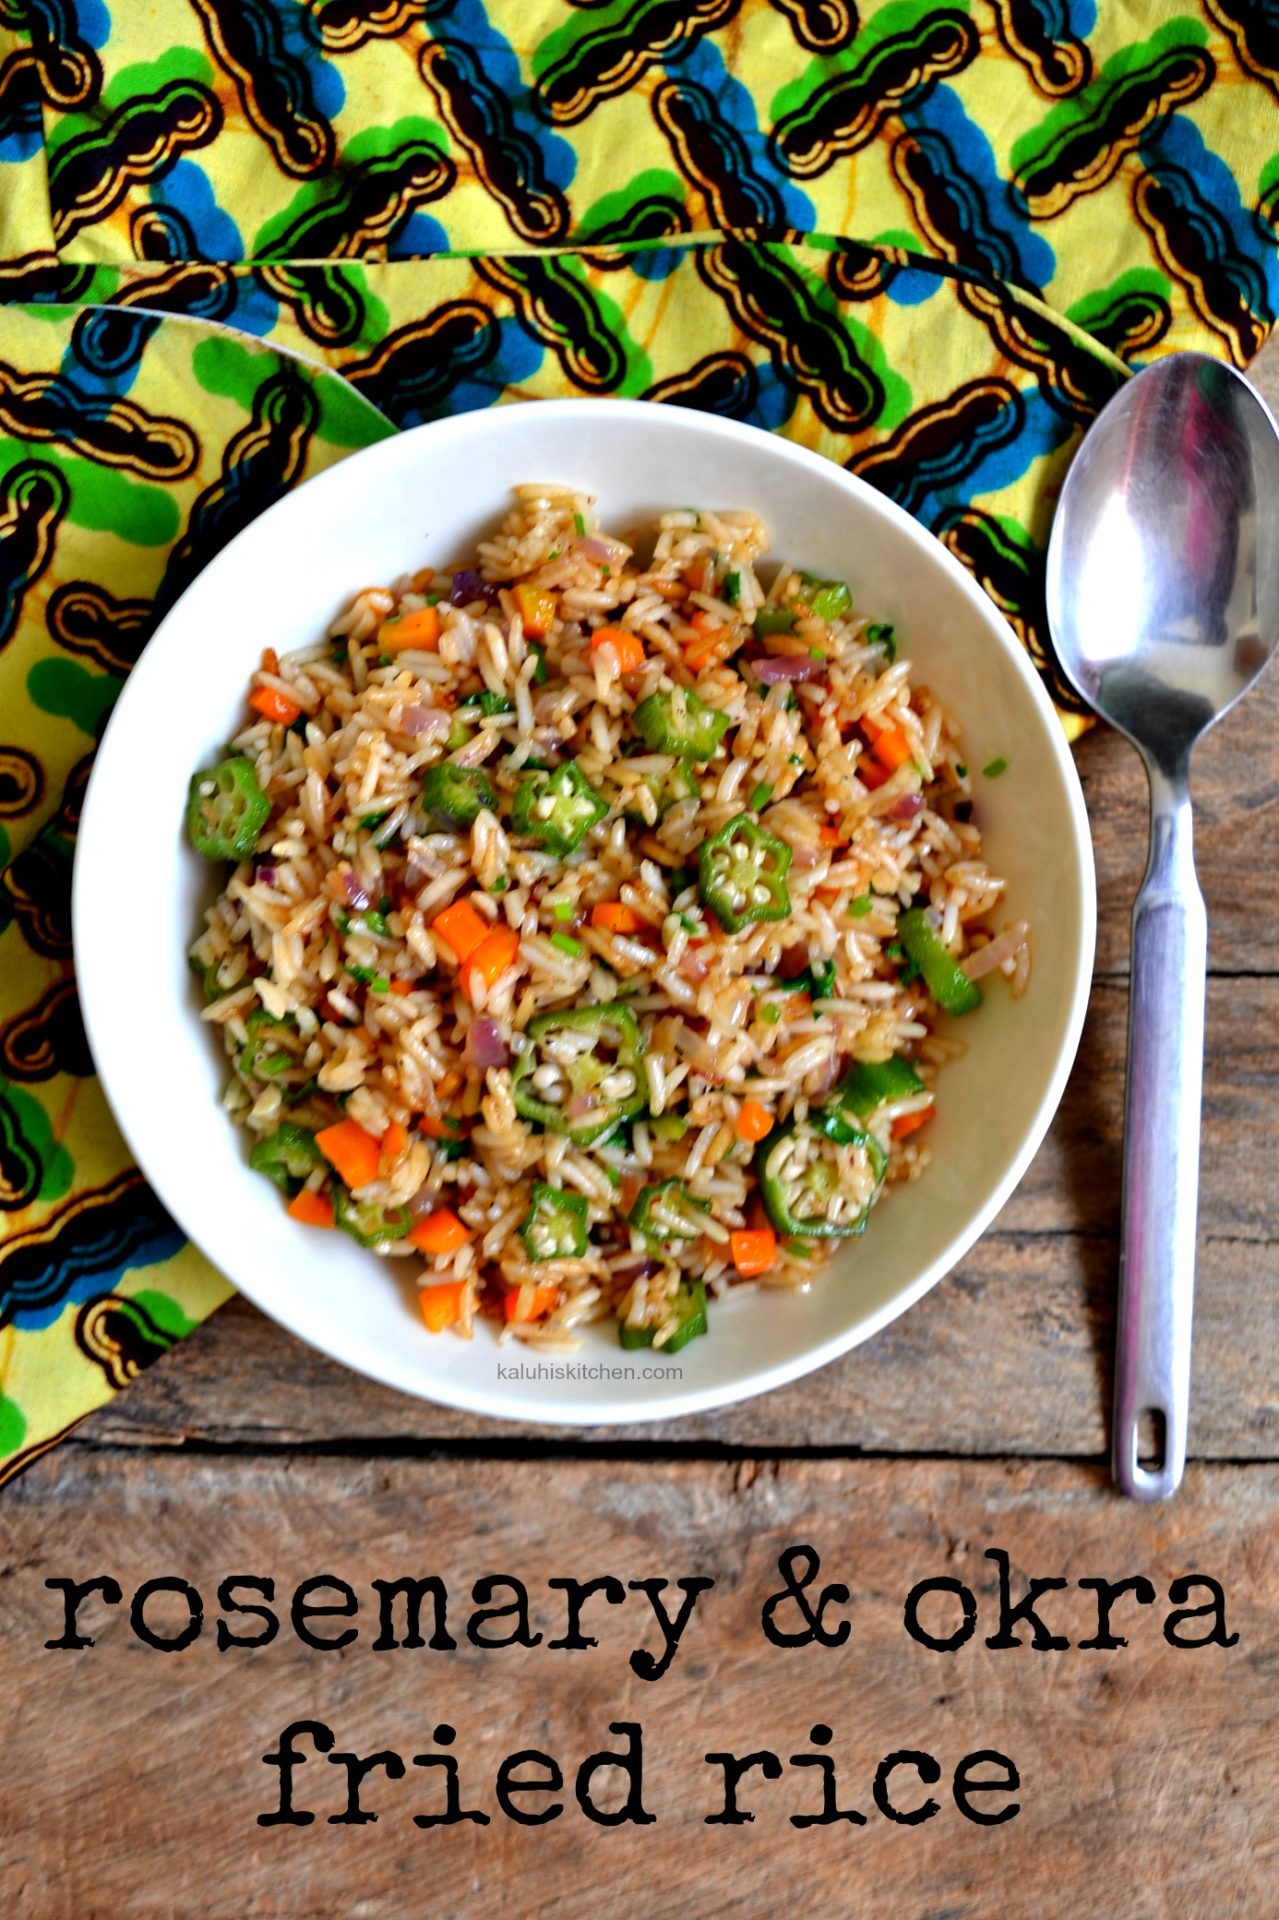 rosemary and okra fried rice wpre[ared by top kenyan food blogger kaluhi adagala of kaluhiskitchen.com